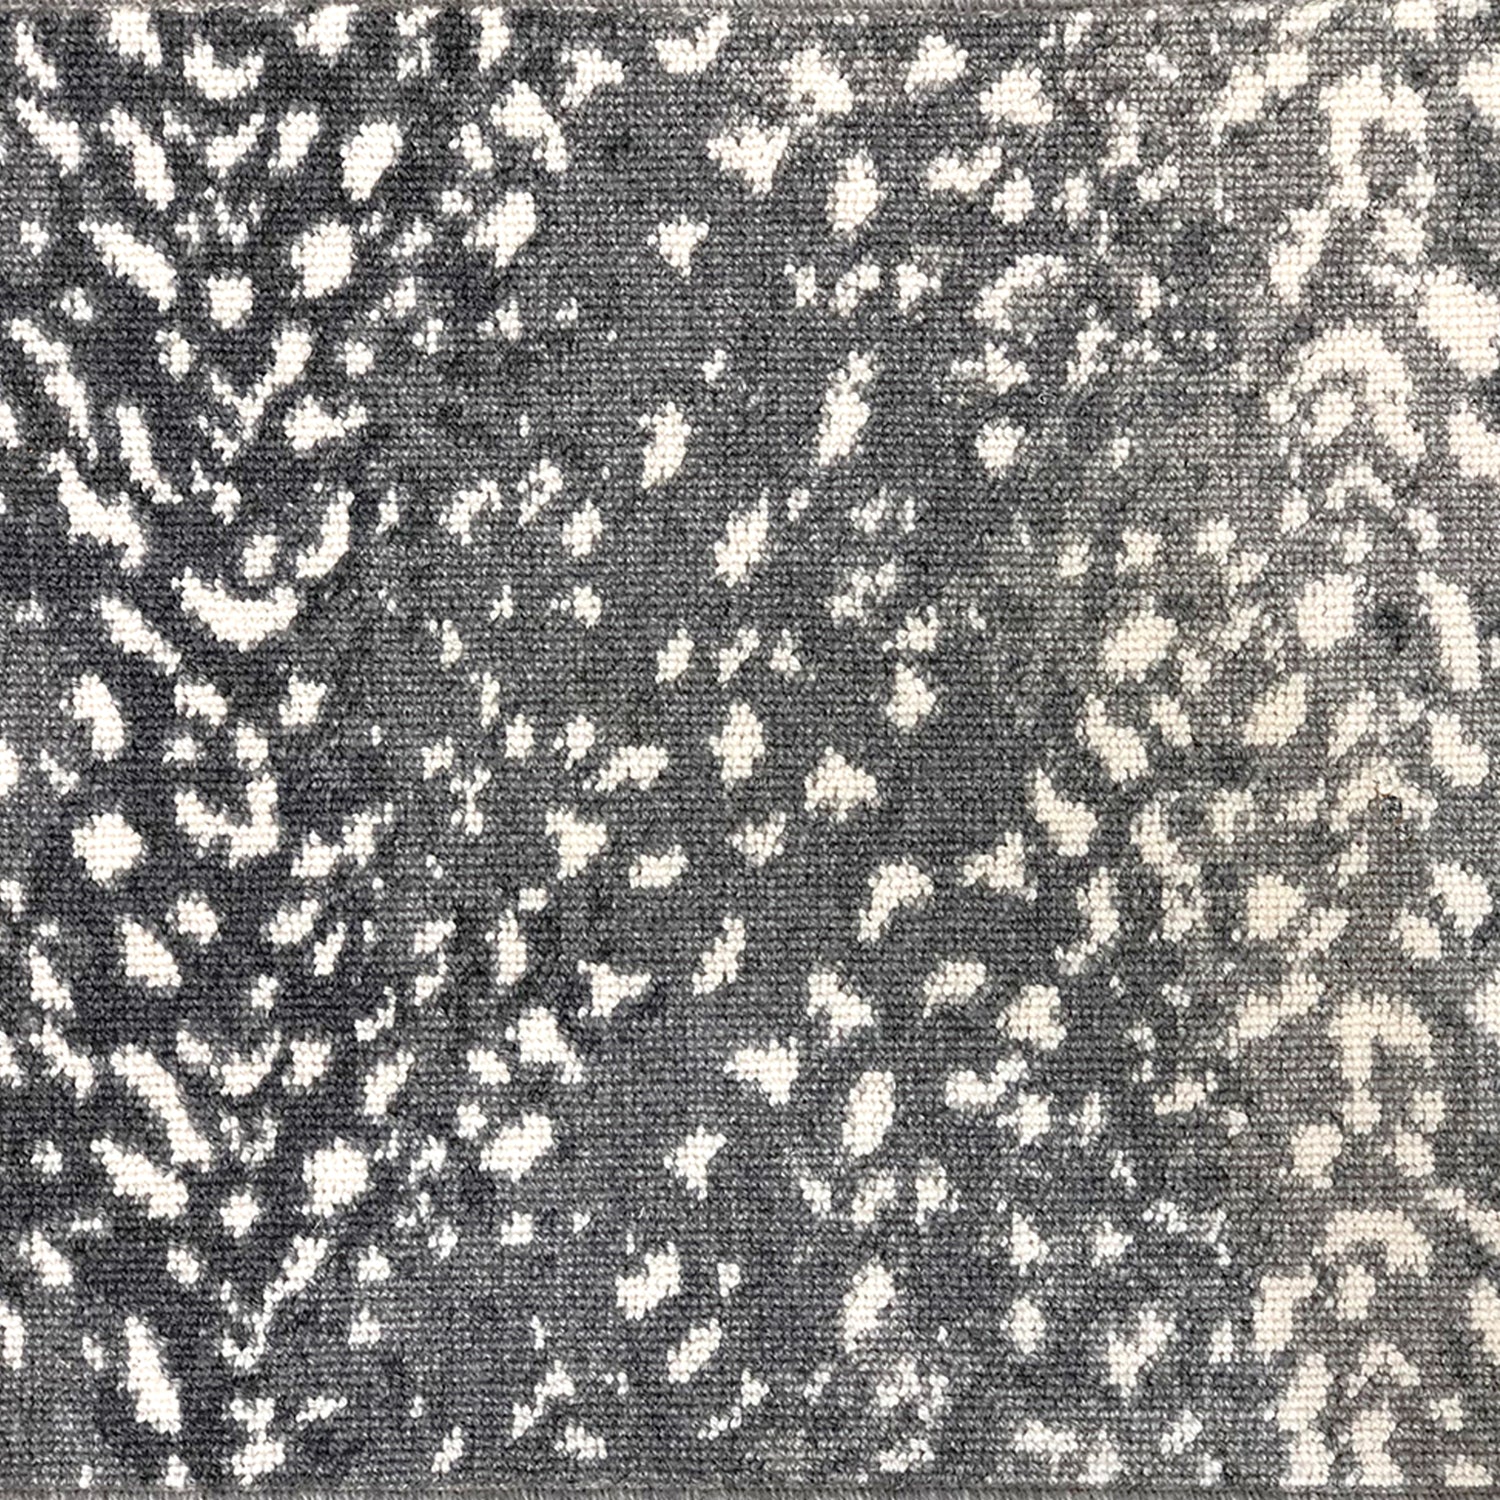 Wool broadloom carpet swatch in a white leopard print on an ombré background in shades of blue-gray.